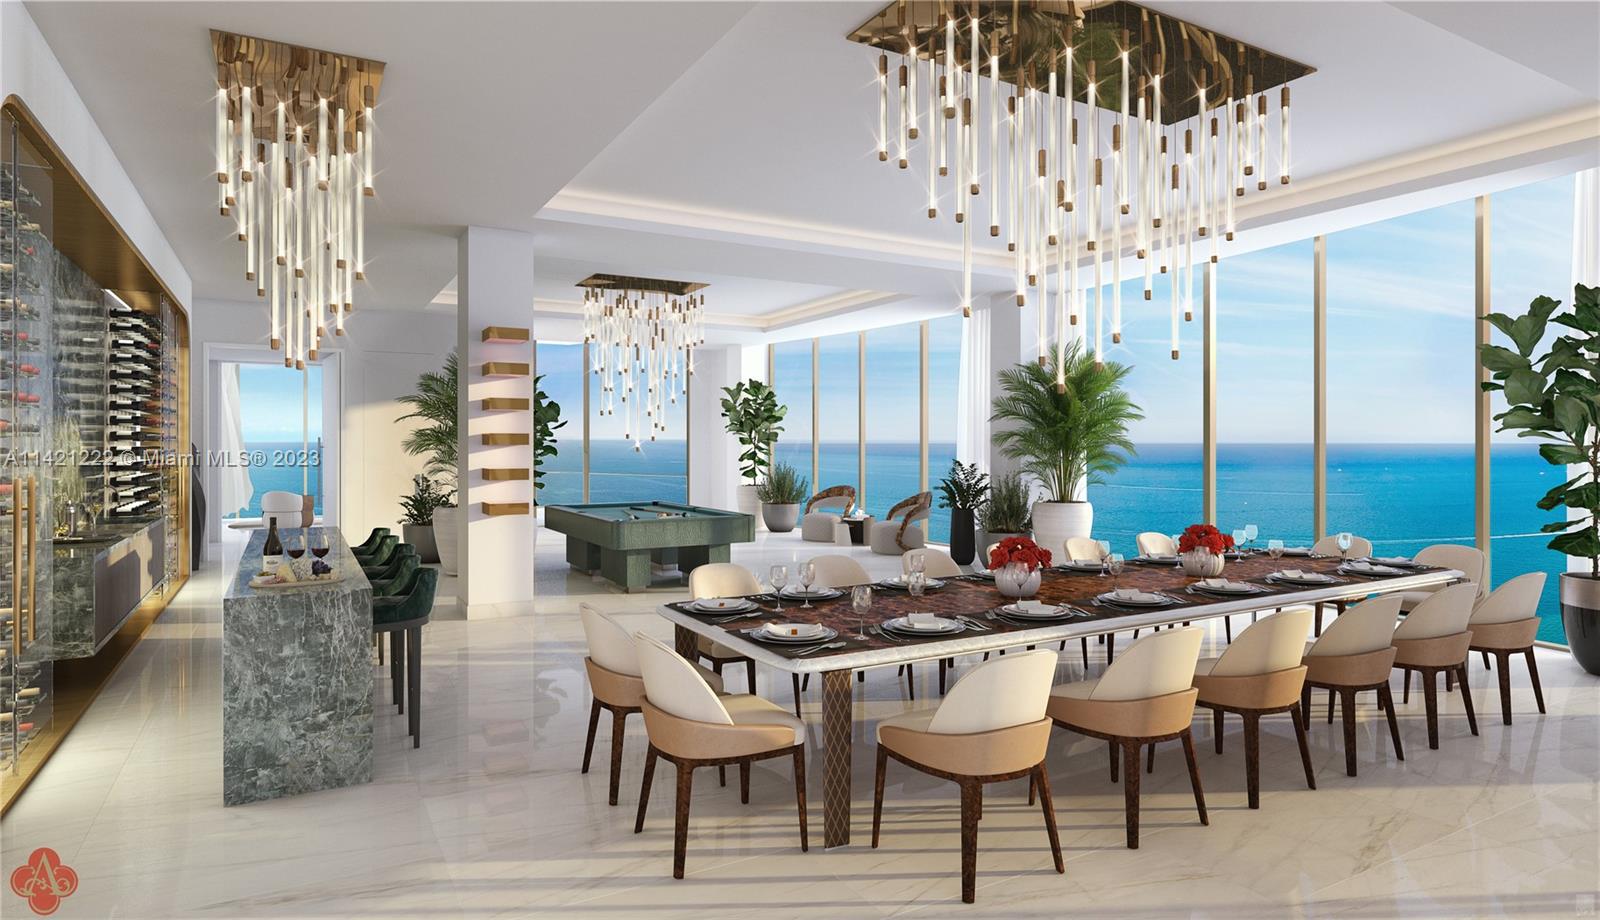 Sunny Isles Beach, FL, 33160 United States, 6 Bedrooms Bedrooms, ,7 BathroomsBathrooms,Residential,For Sale,A11421222